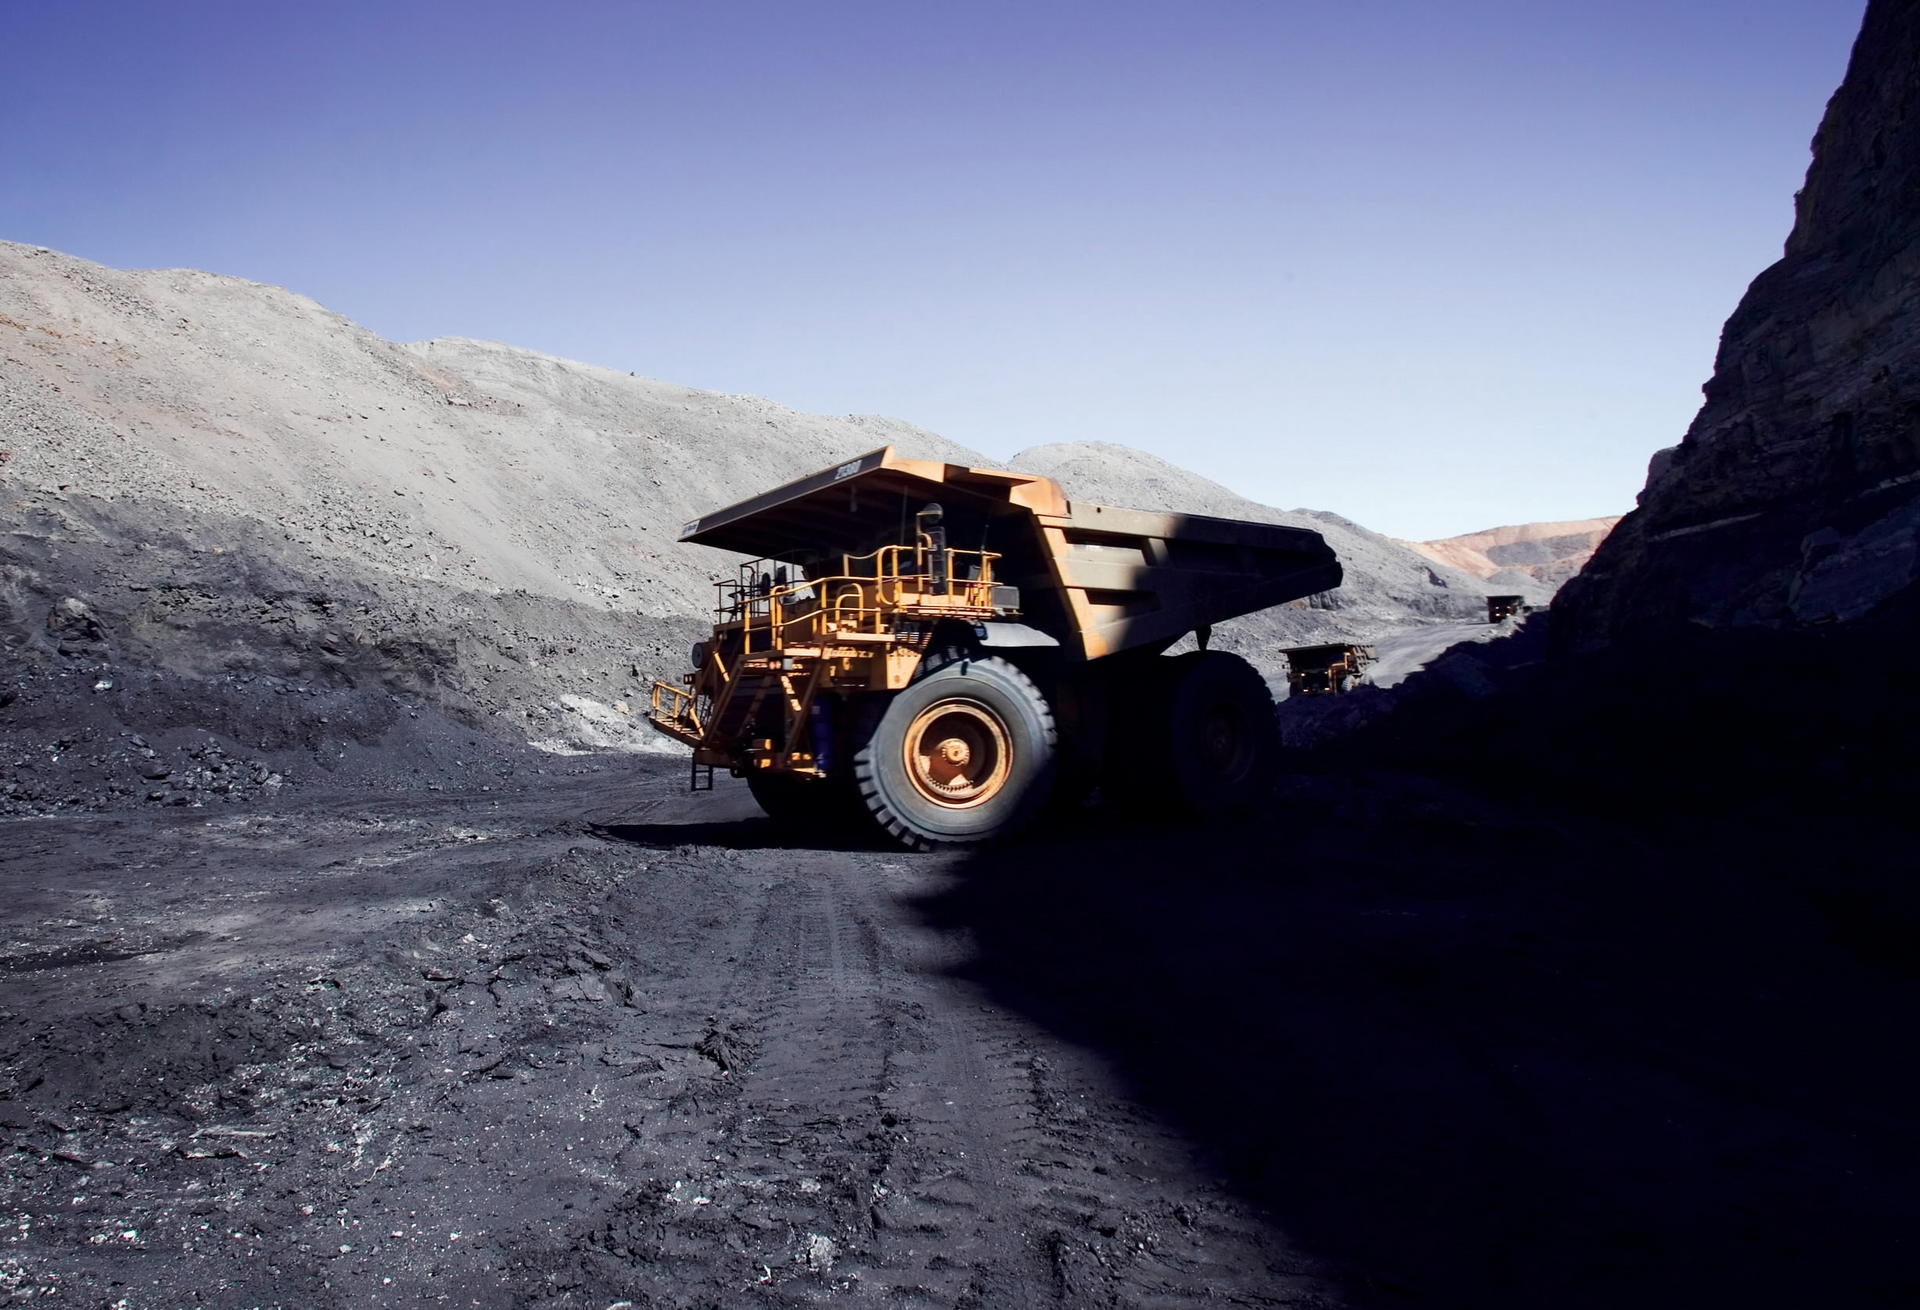 Coal facilities are increasing in Australia, including the construction of export terminals.